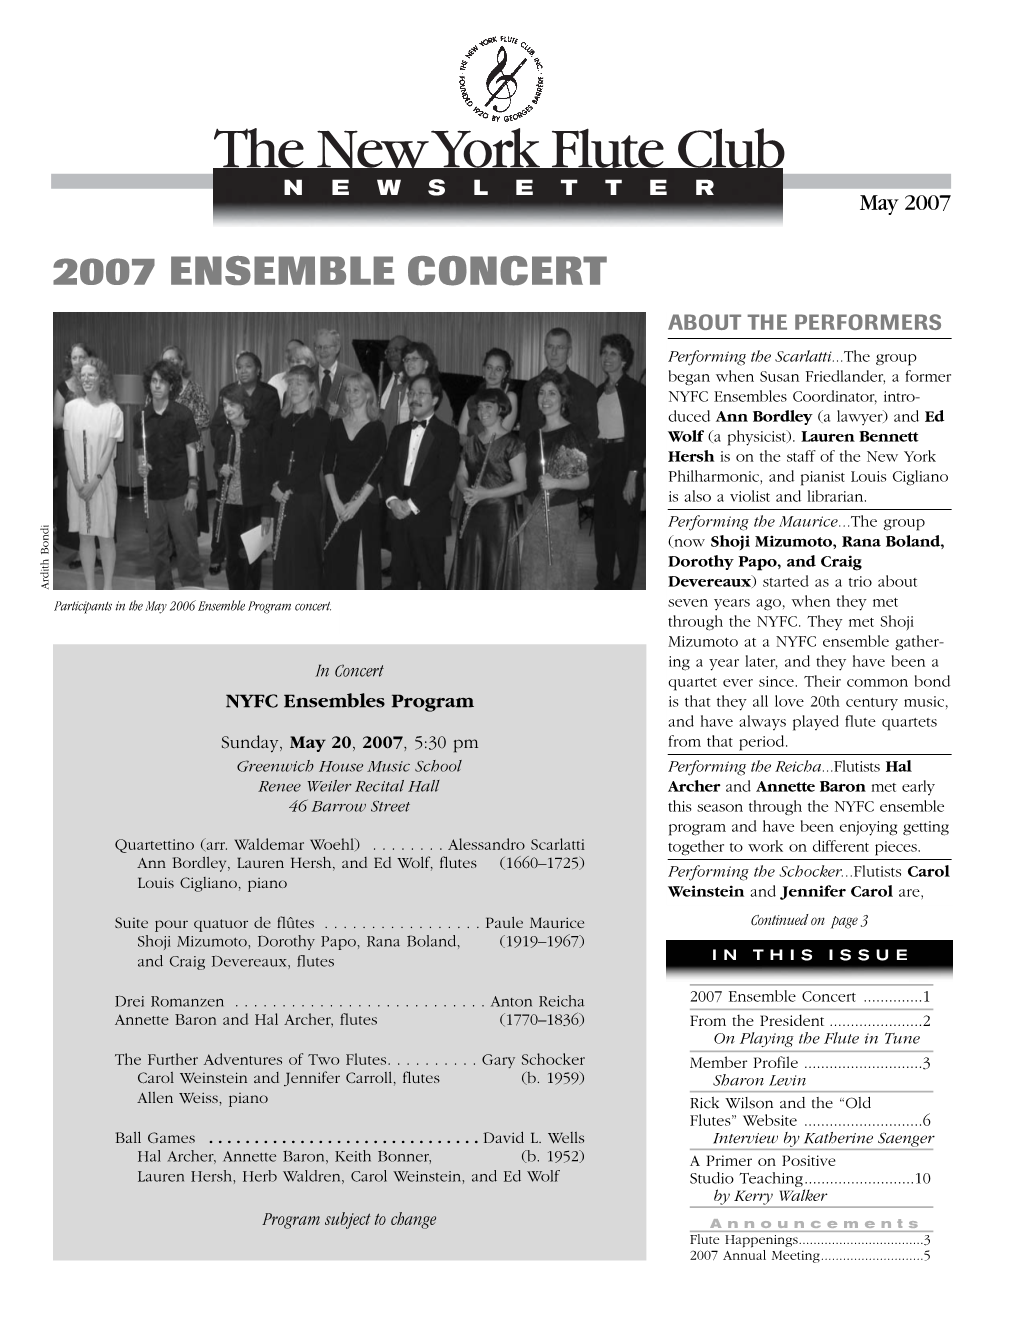 2007 Ensemble Concert About the Performers